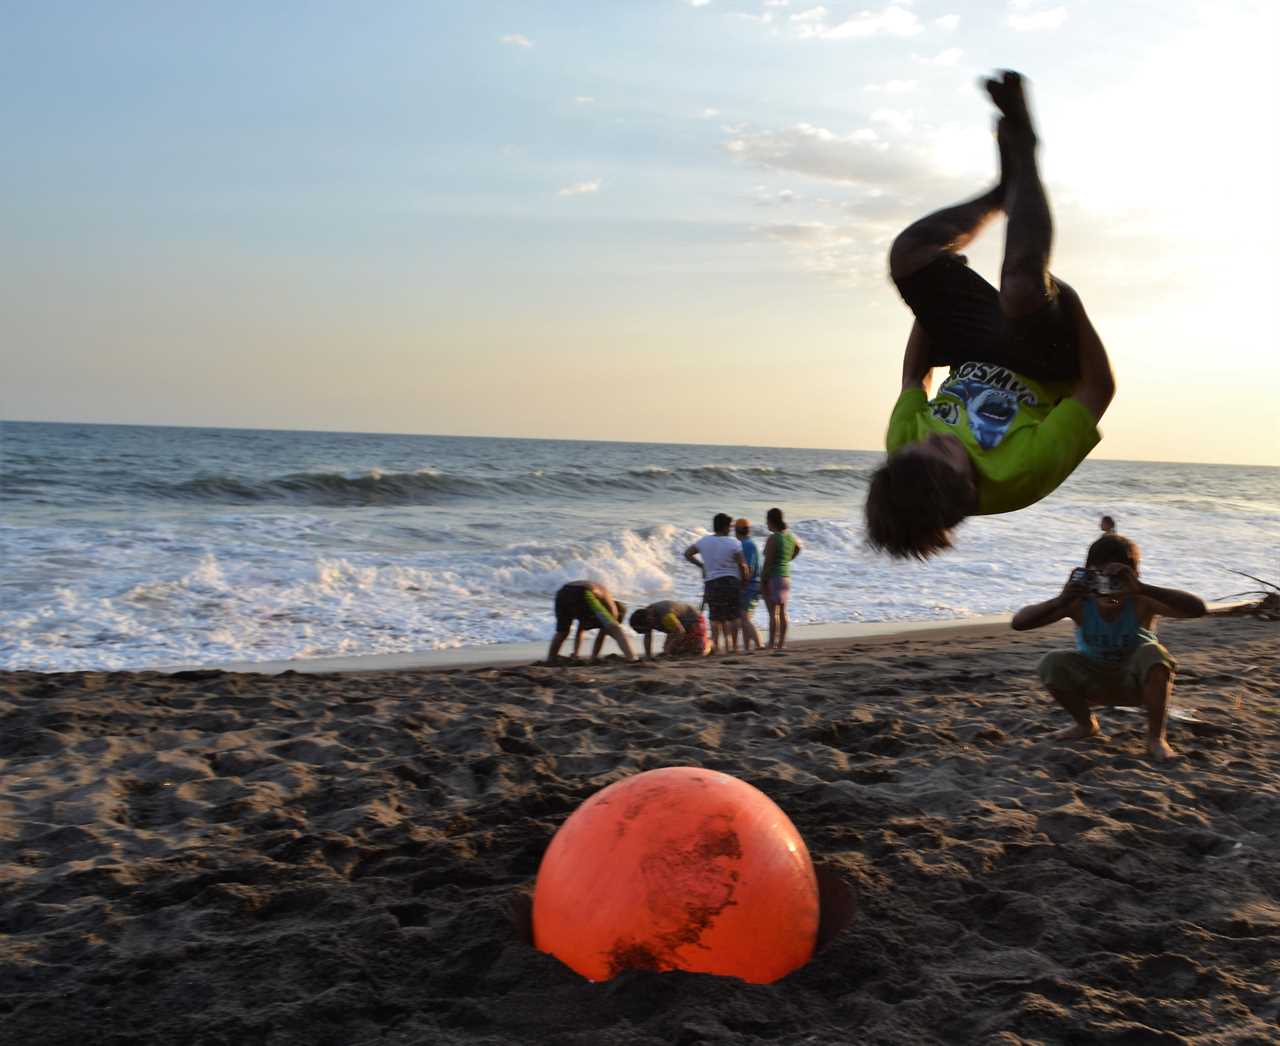 tricks and flips at the beach, beach house in guatemala, beach birthday party